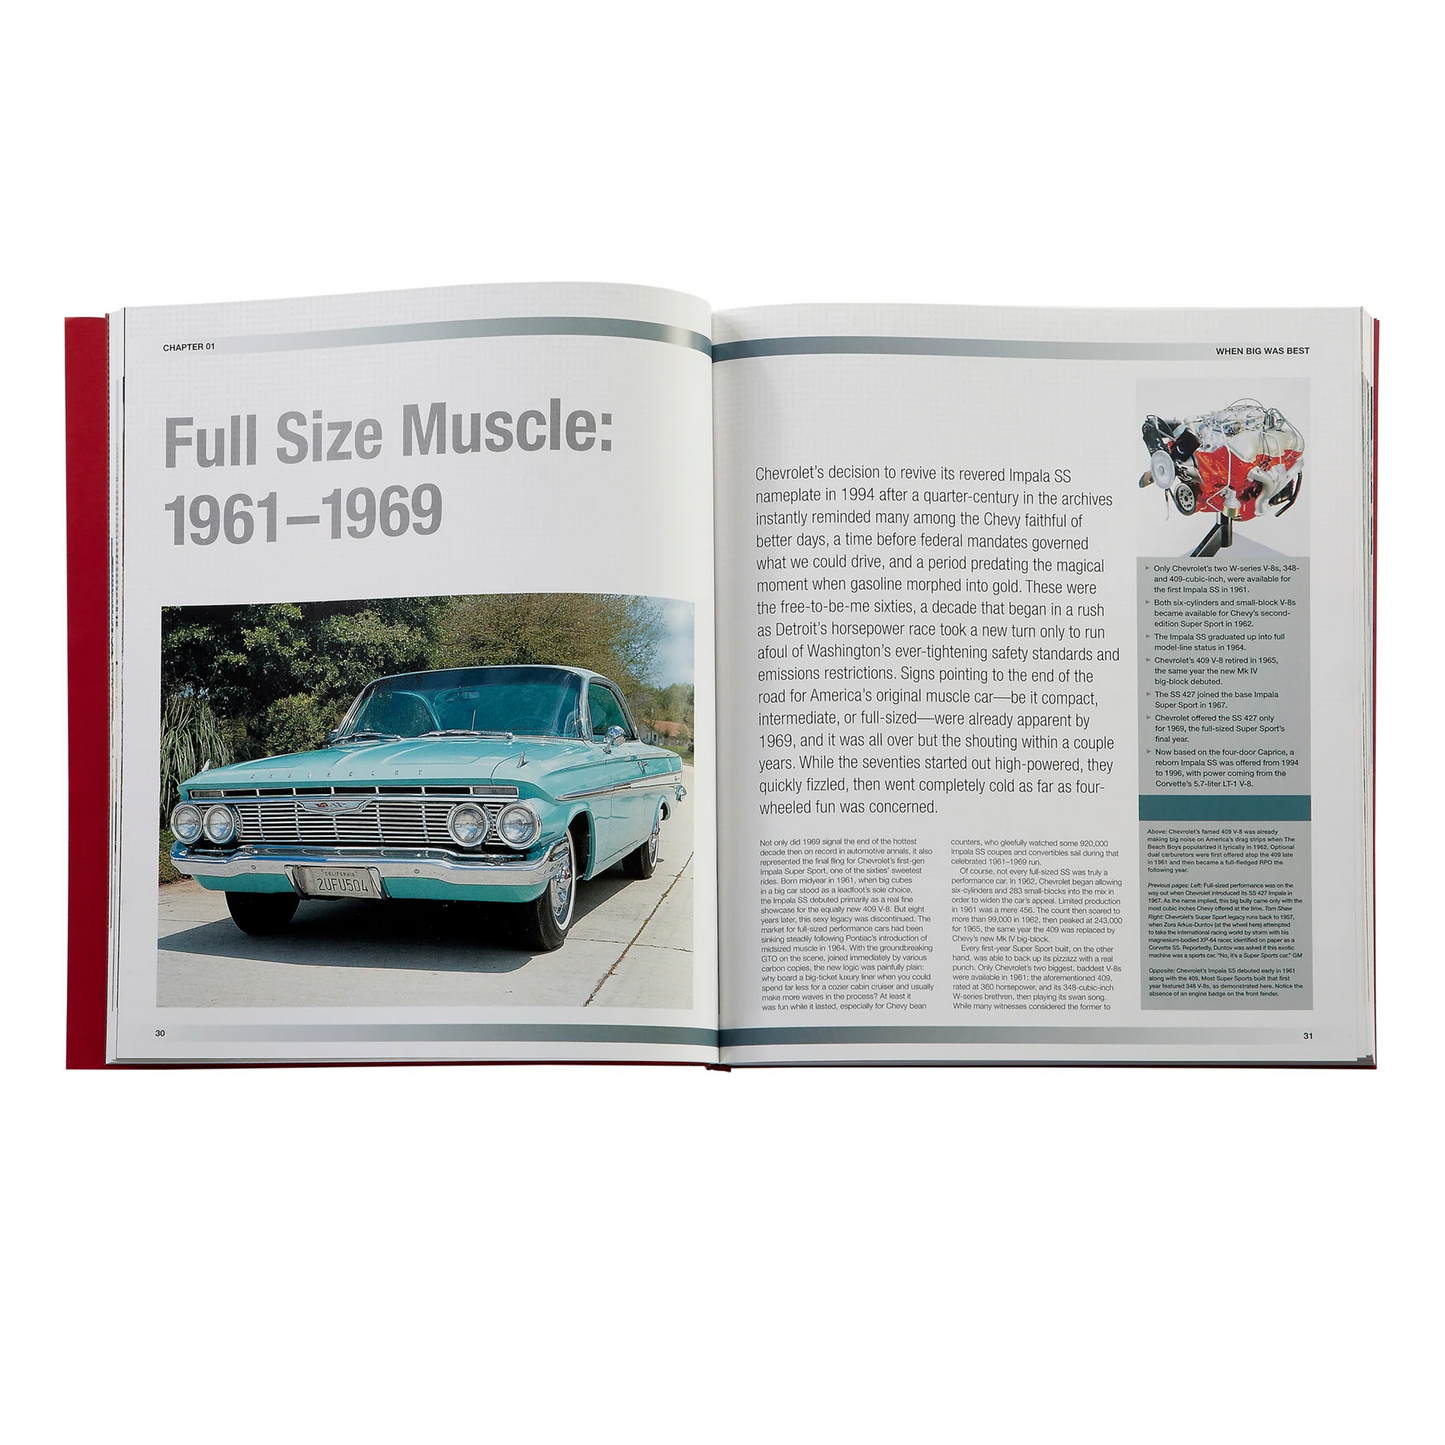 The Complete Book Of Classic Chevrolet